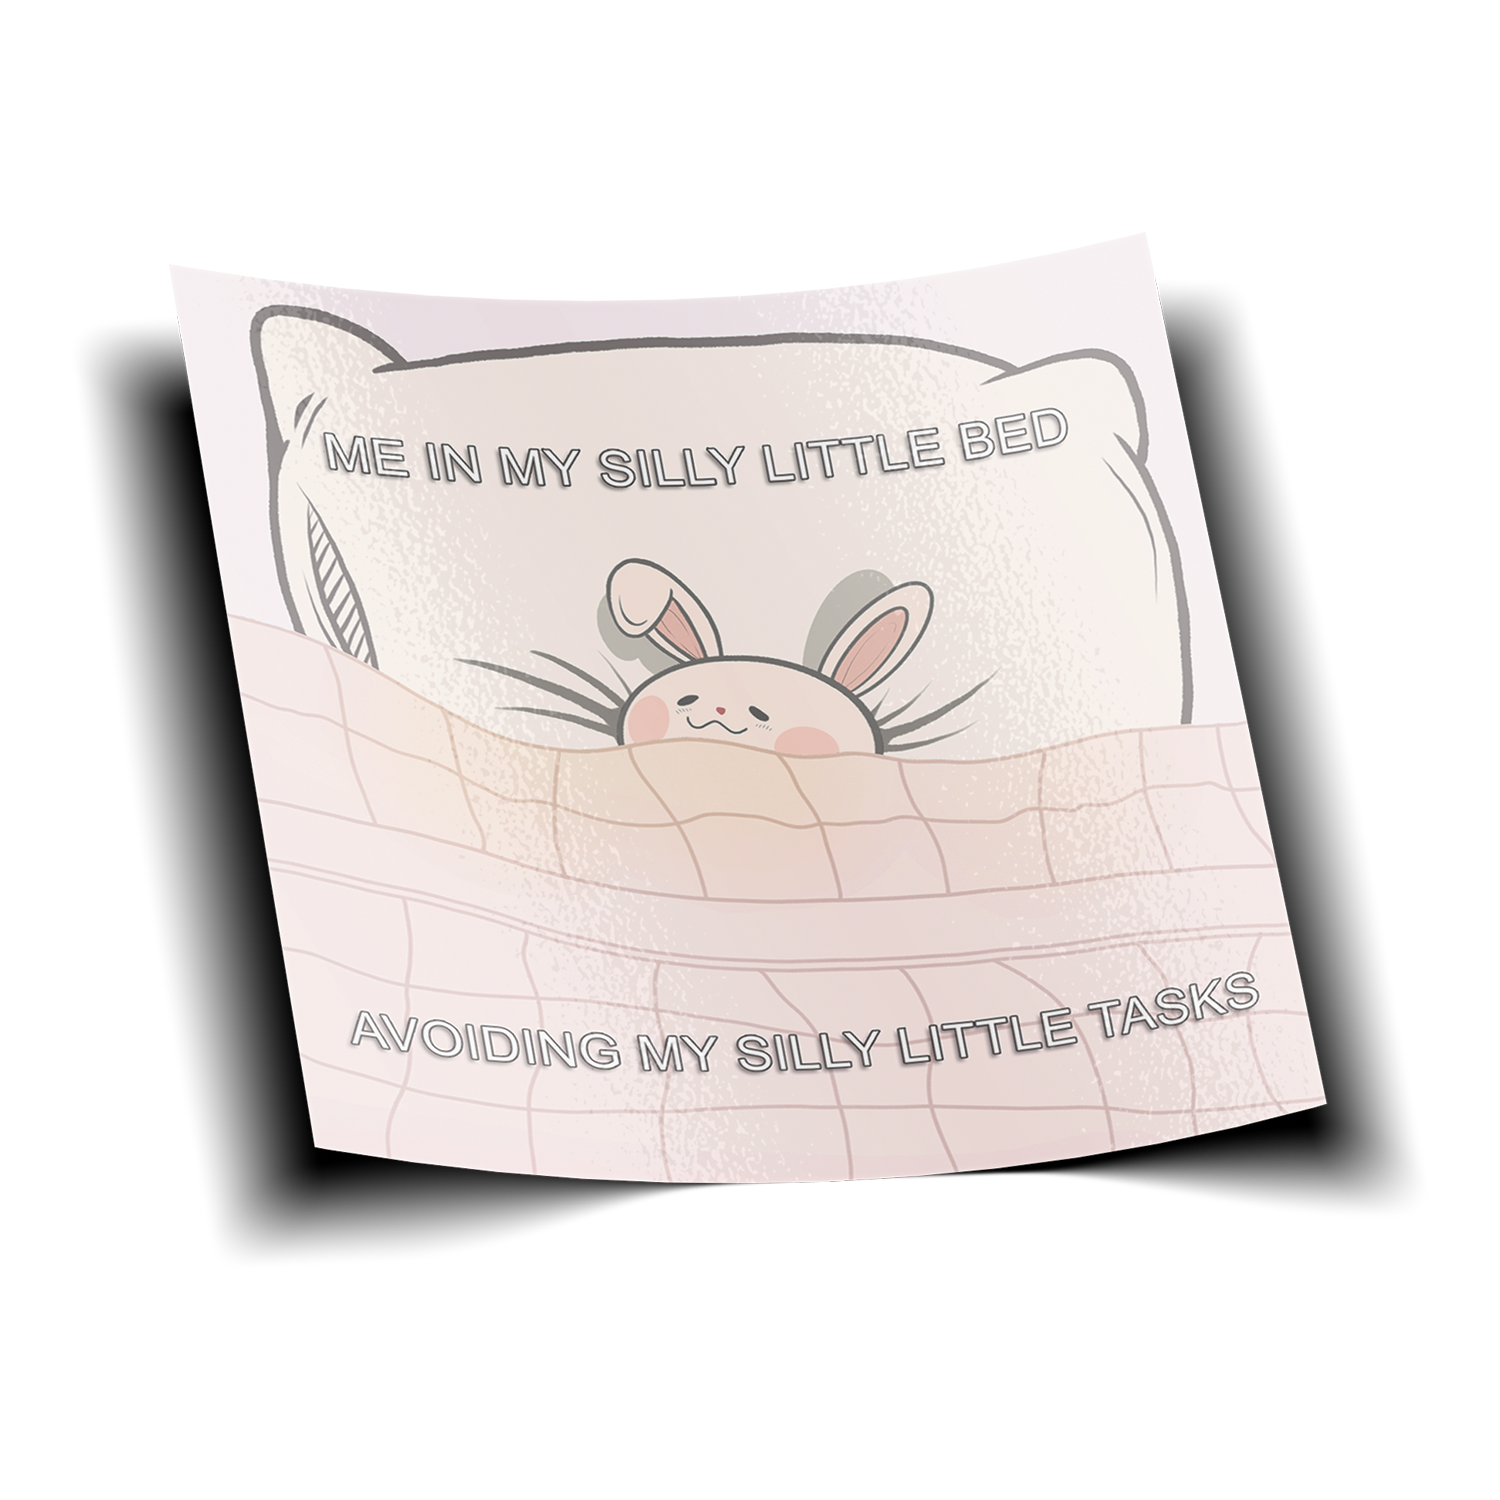 Bunny in Bed Sticker design features a bunny in bed with text "Me in a silly little bed avoiding my silly little tasks."